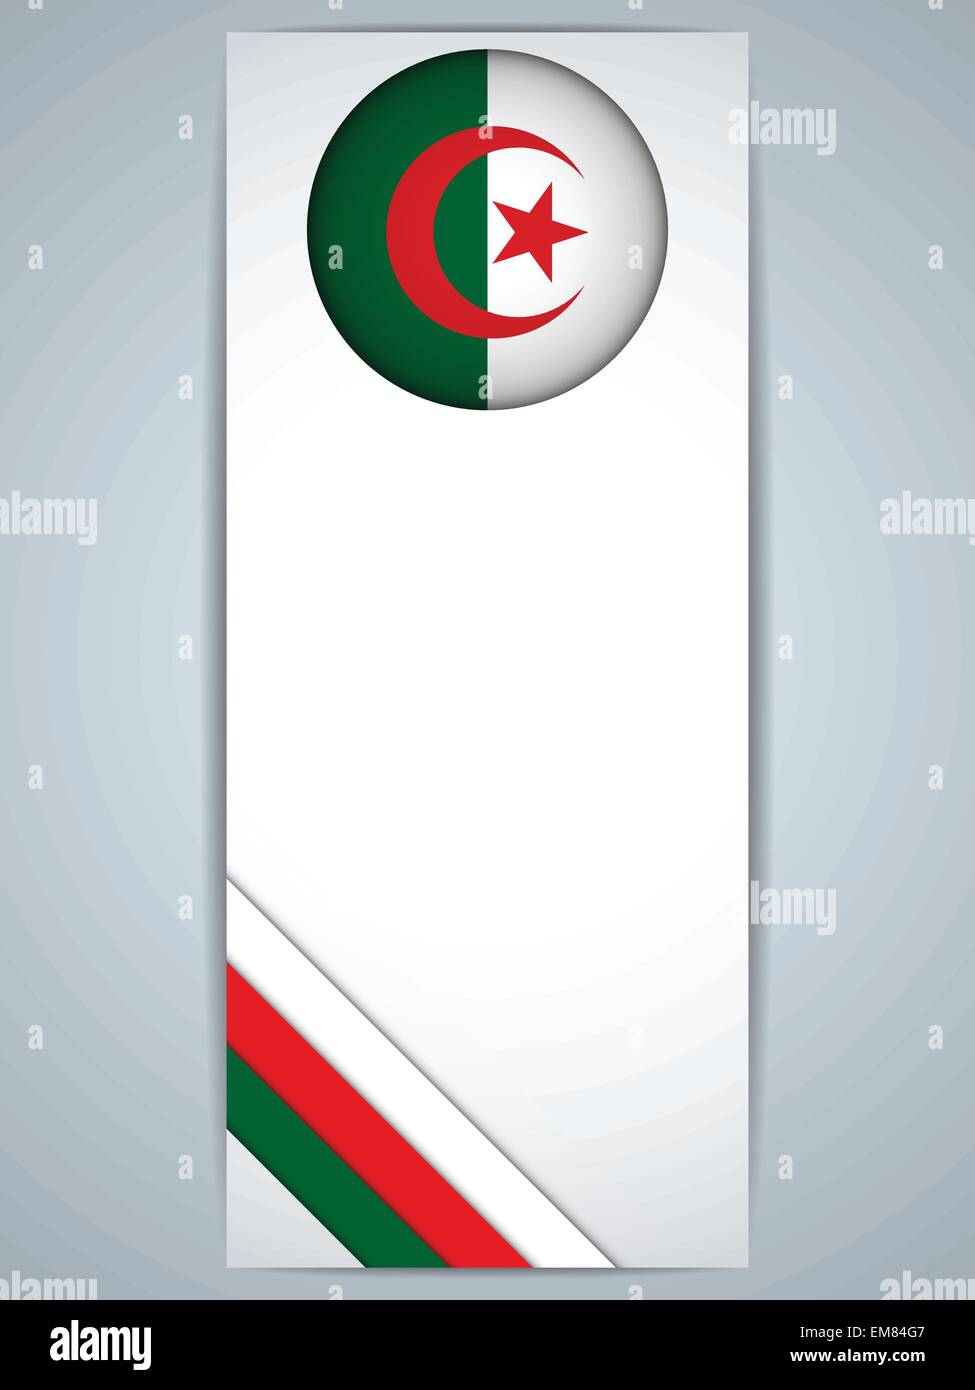 Algeria Country Set of Banners Stock Vector